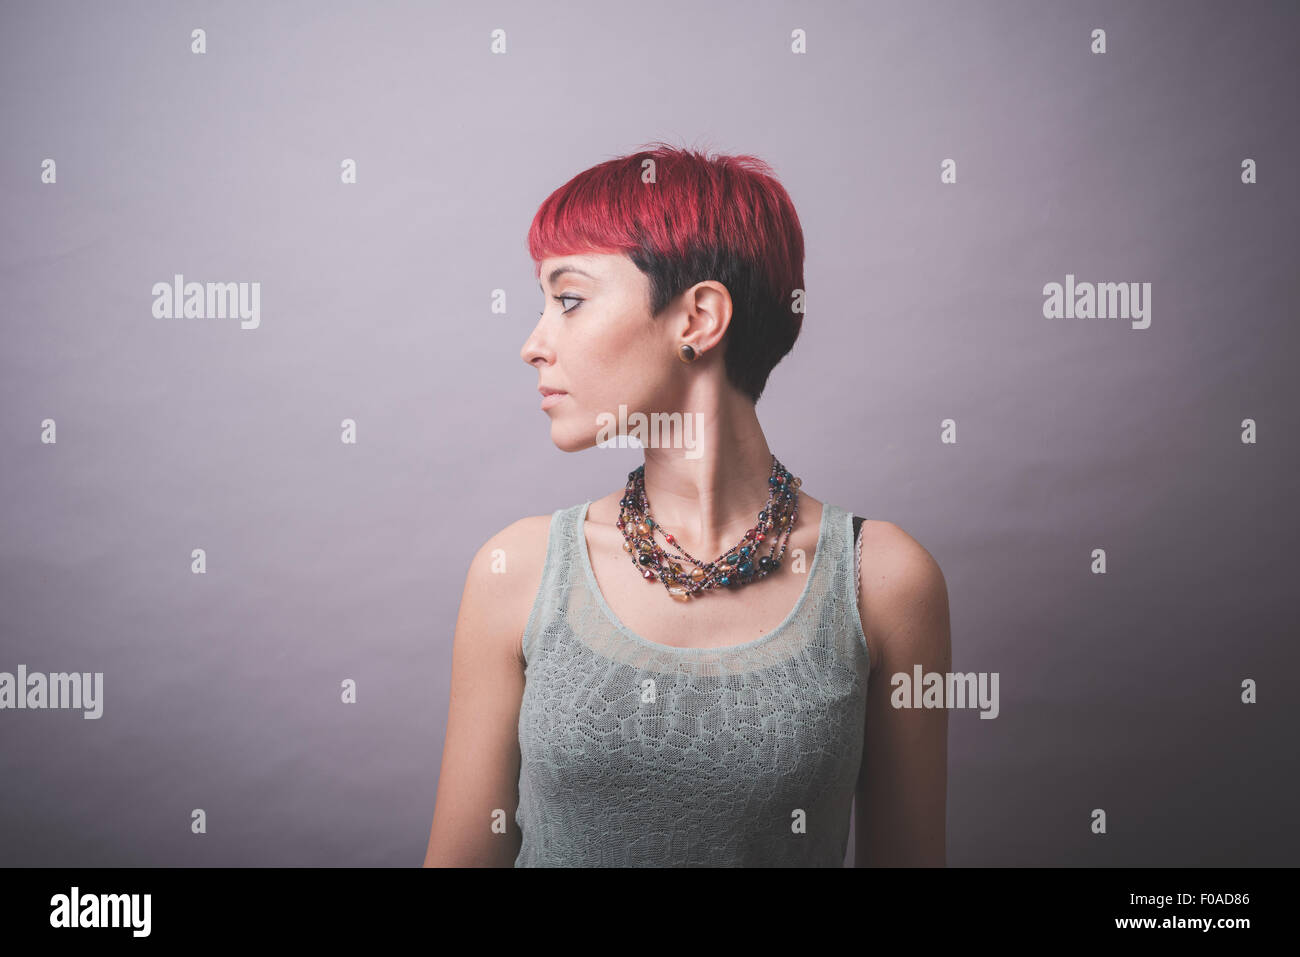 Studio portrait of young woman with short pink hair looking over her shoulder Stock Photo